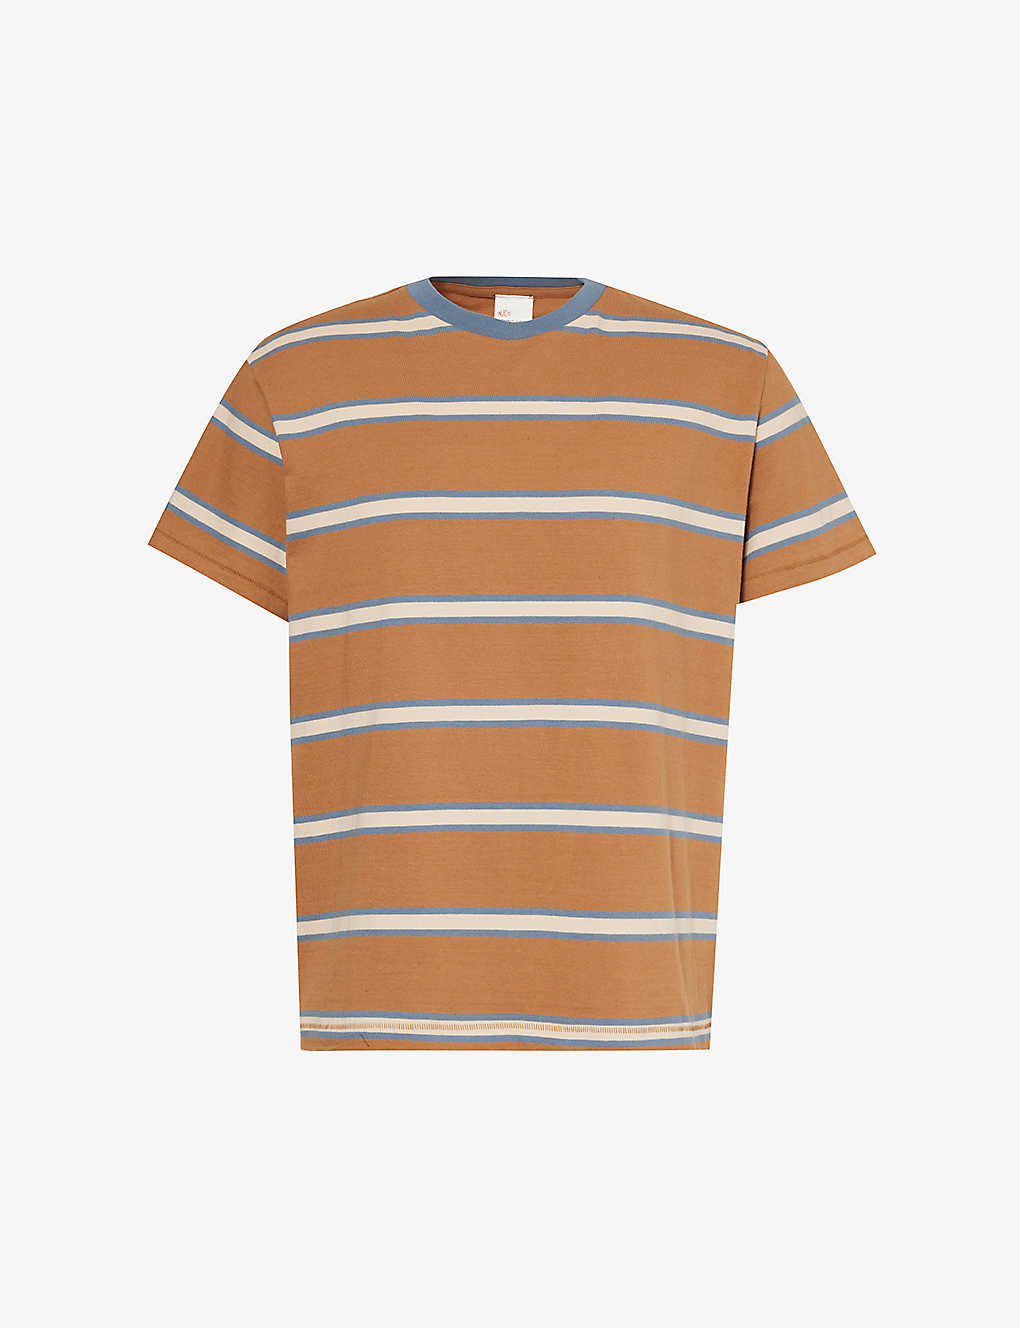 NUDIE JEANS NUDIE JEANS MEN'S TOBACCO LEFFE STRIPED COTTON-JERSEY T-SHIRT